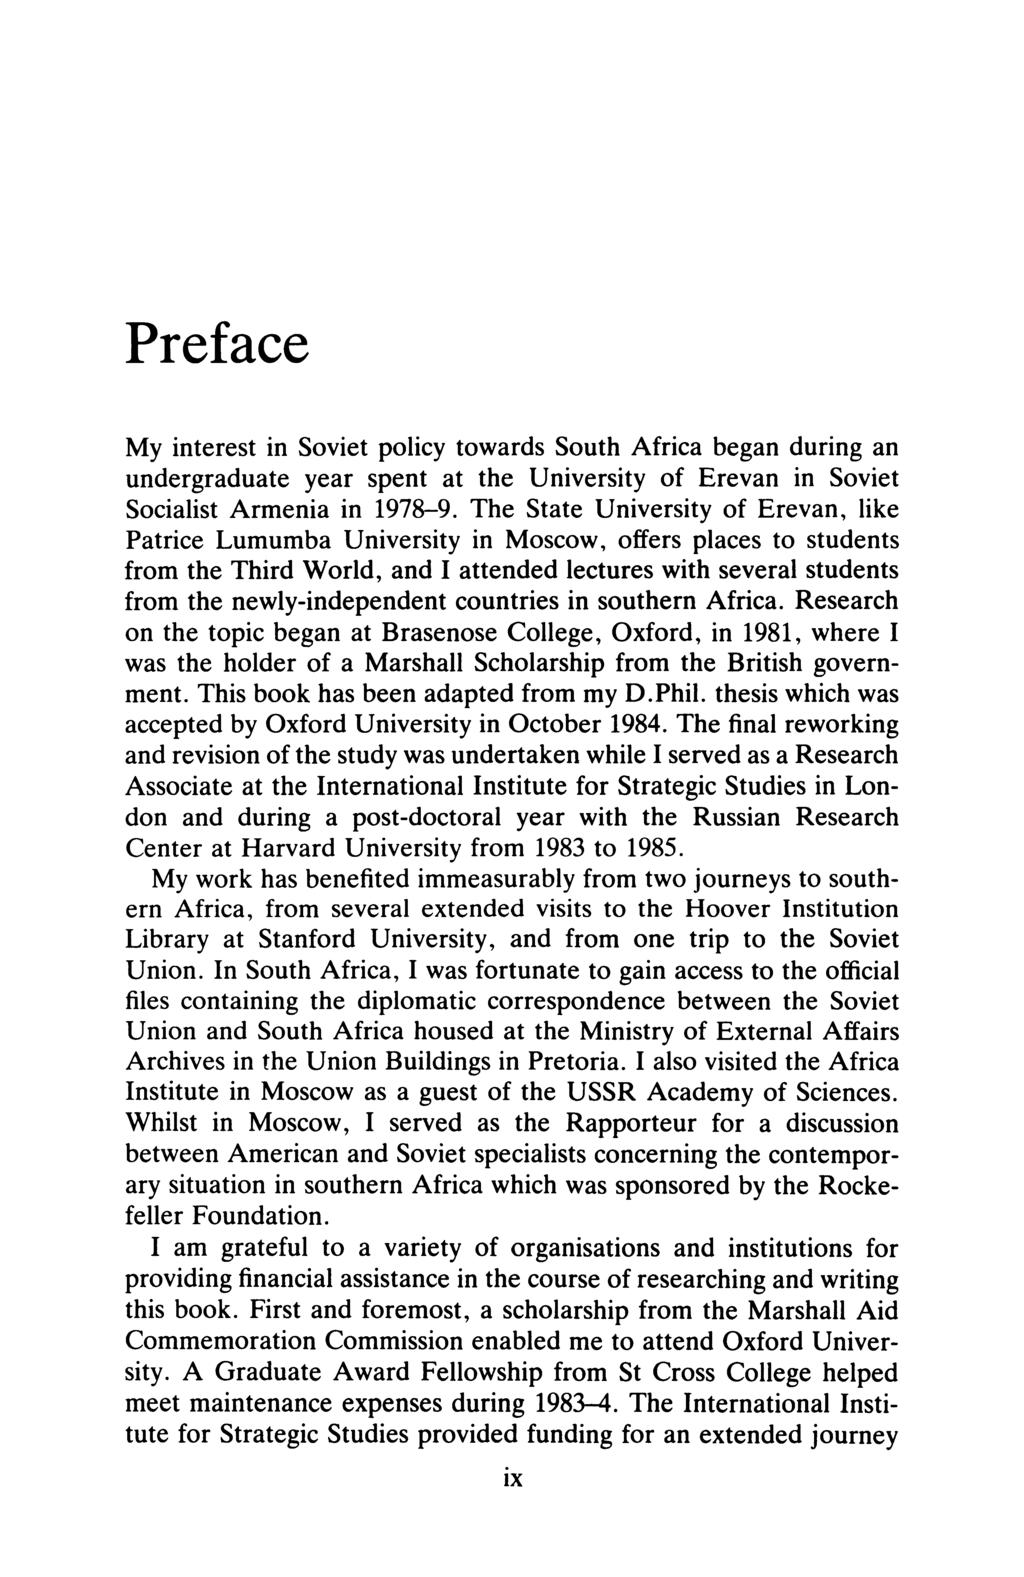 Preface My interest in Soviet policy towards South Africa began during an undergraduate year spent at the University of Erevan in Soviet Socialist Armenia in 1978-9.